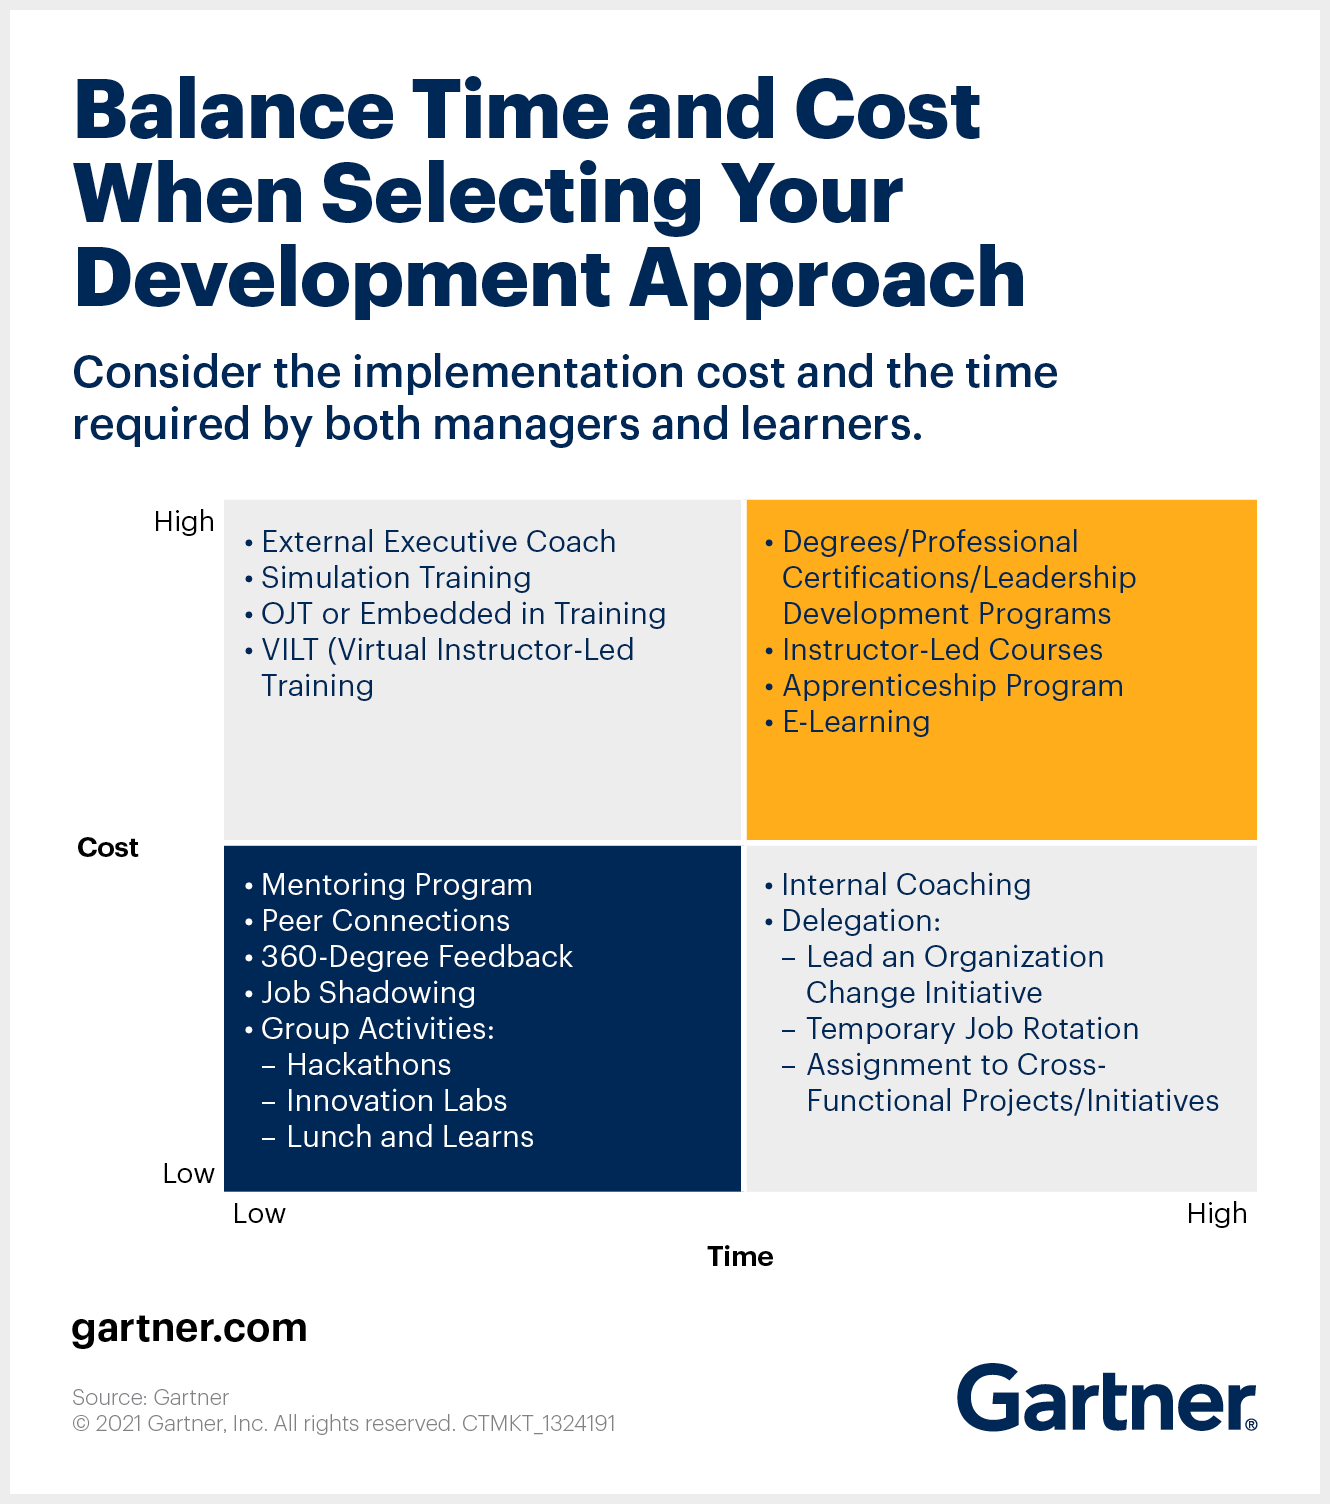 Software Developer employee development approaches based on time and cost